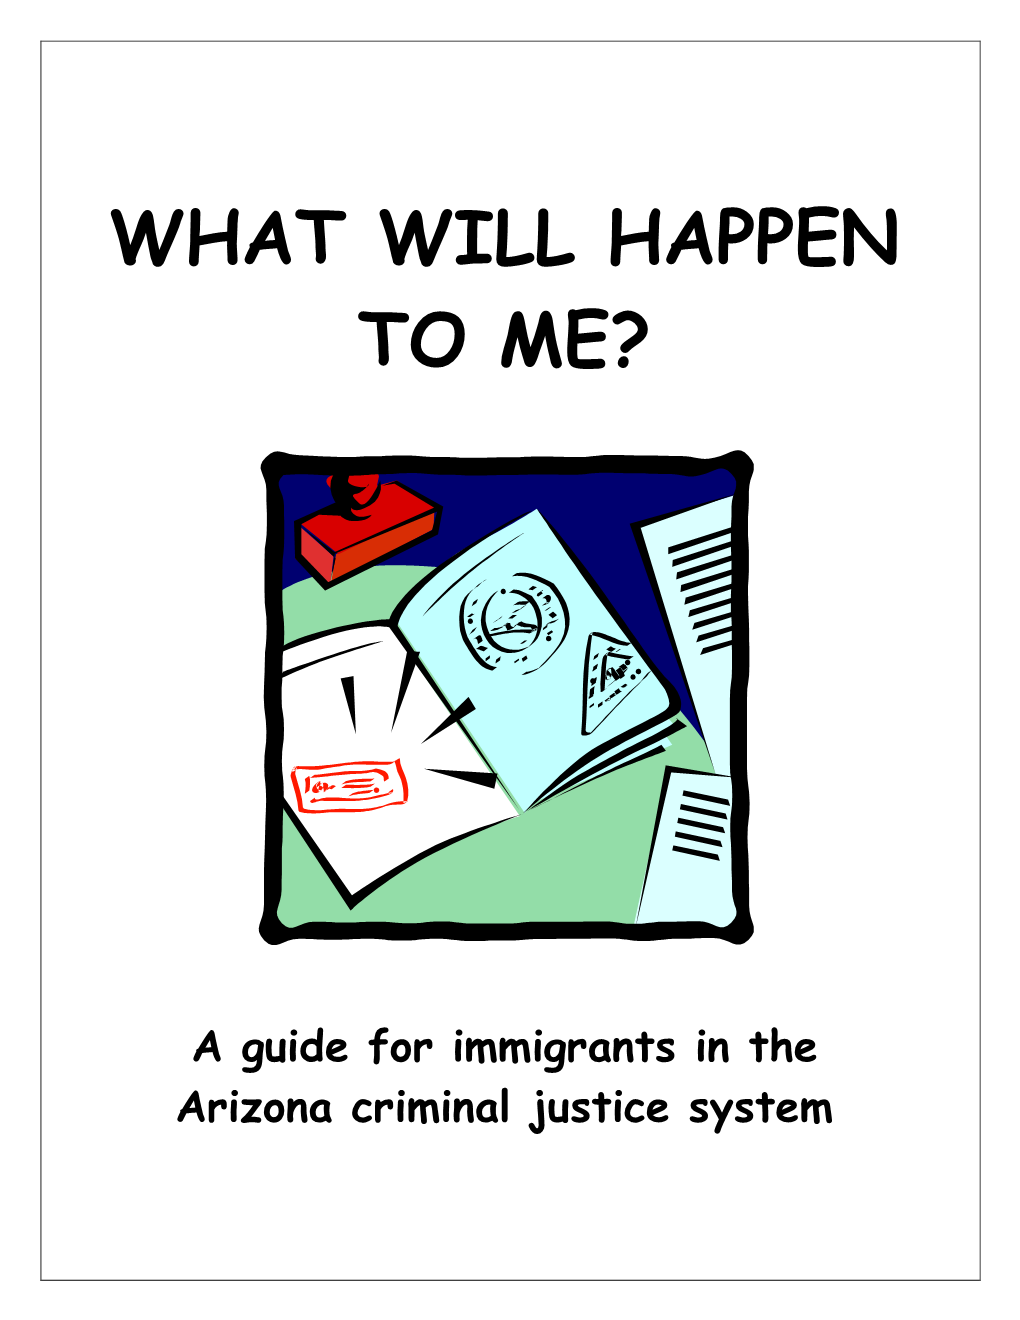 A Guide for Immigrants in the Arizona Criminal Justice System